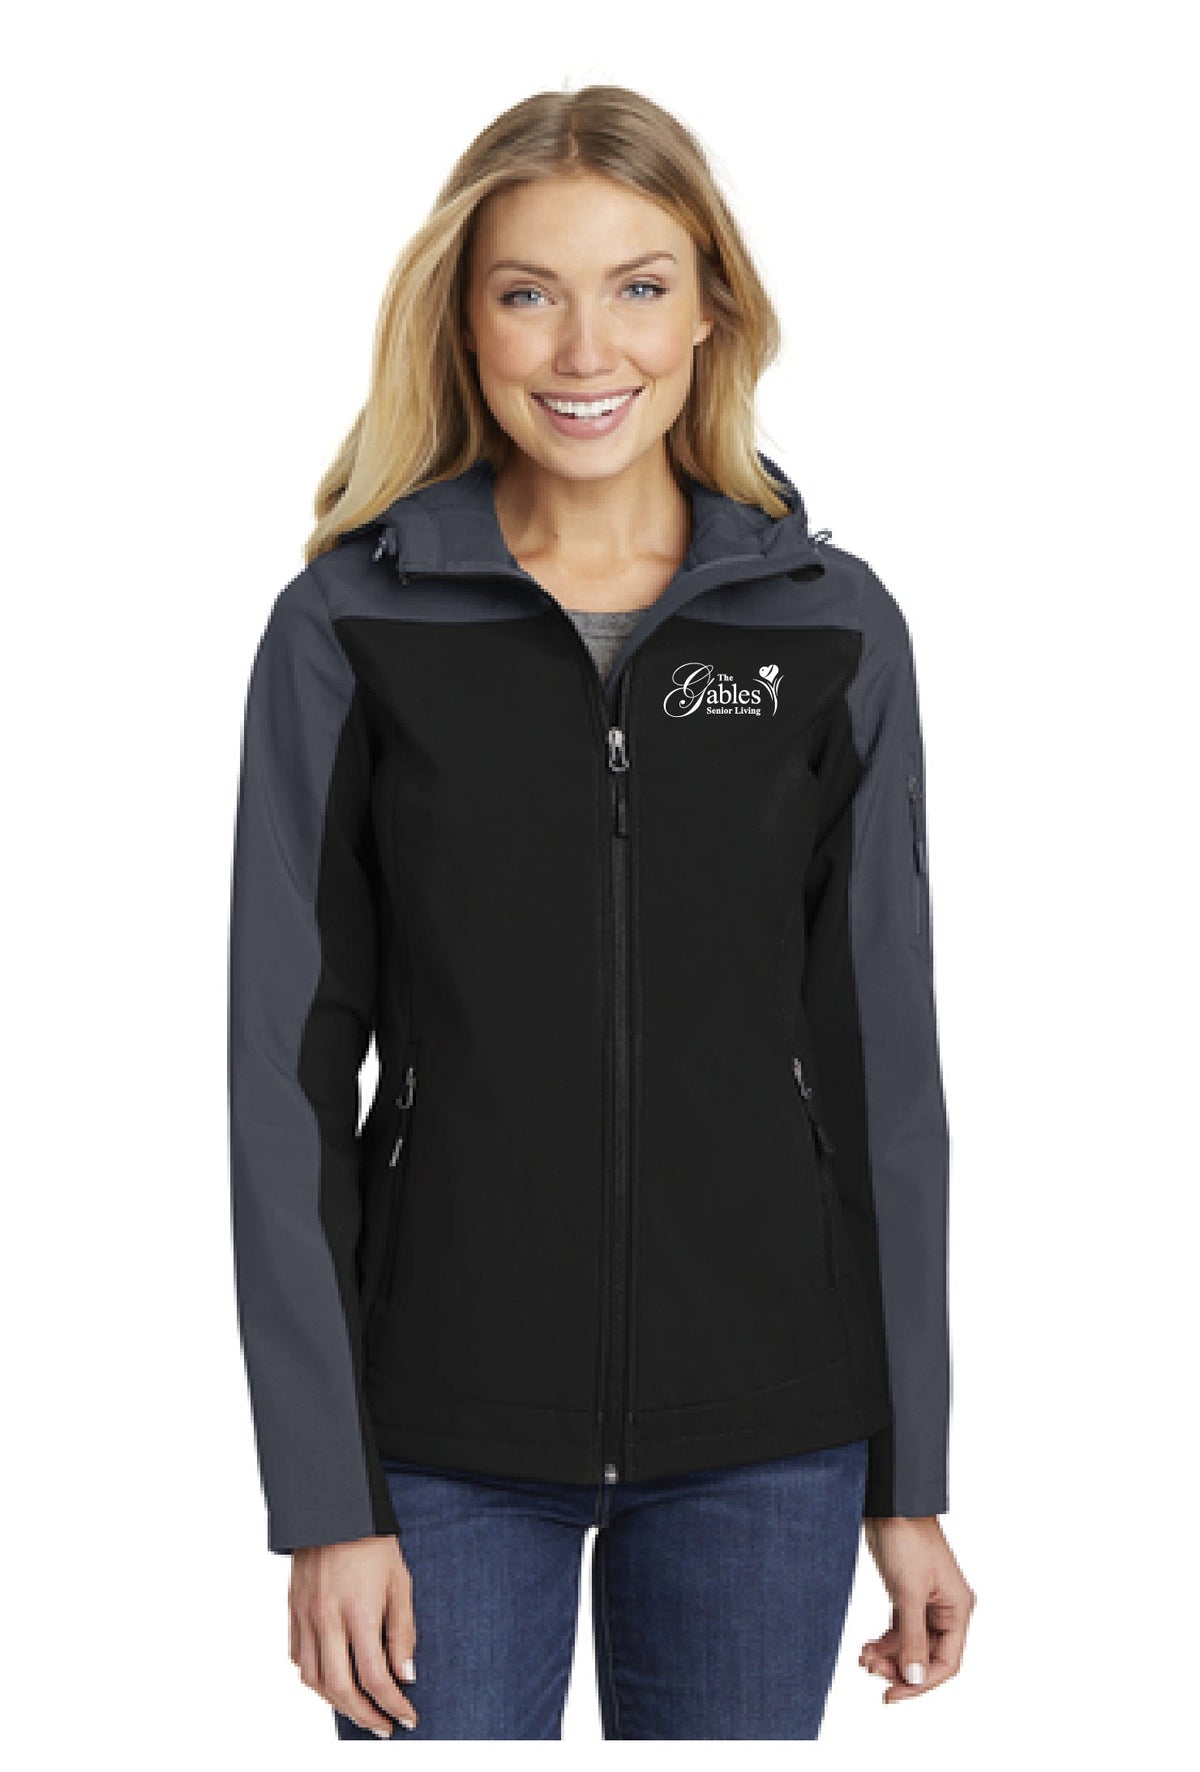 The Gables - L335 Ladies Black/Grey Hooded Core Soft Shell Jacket